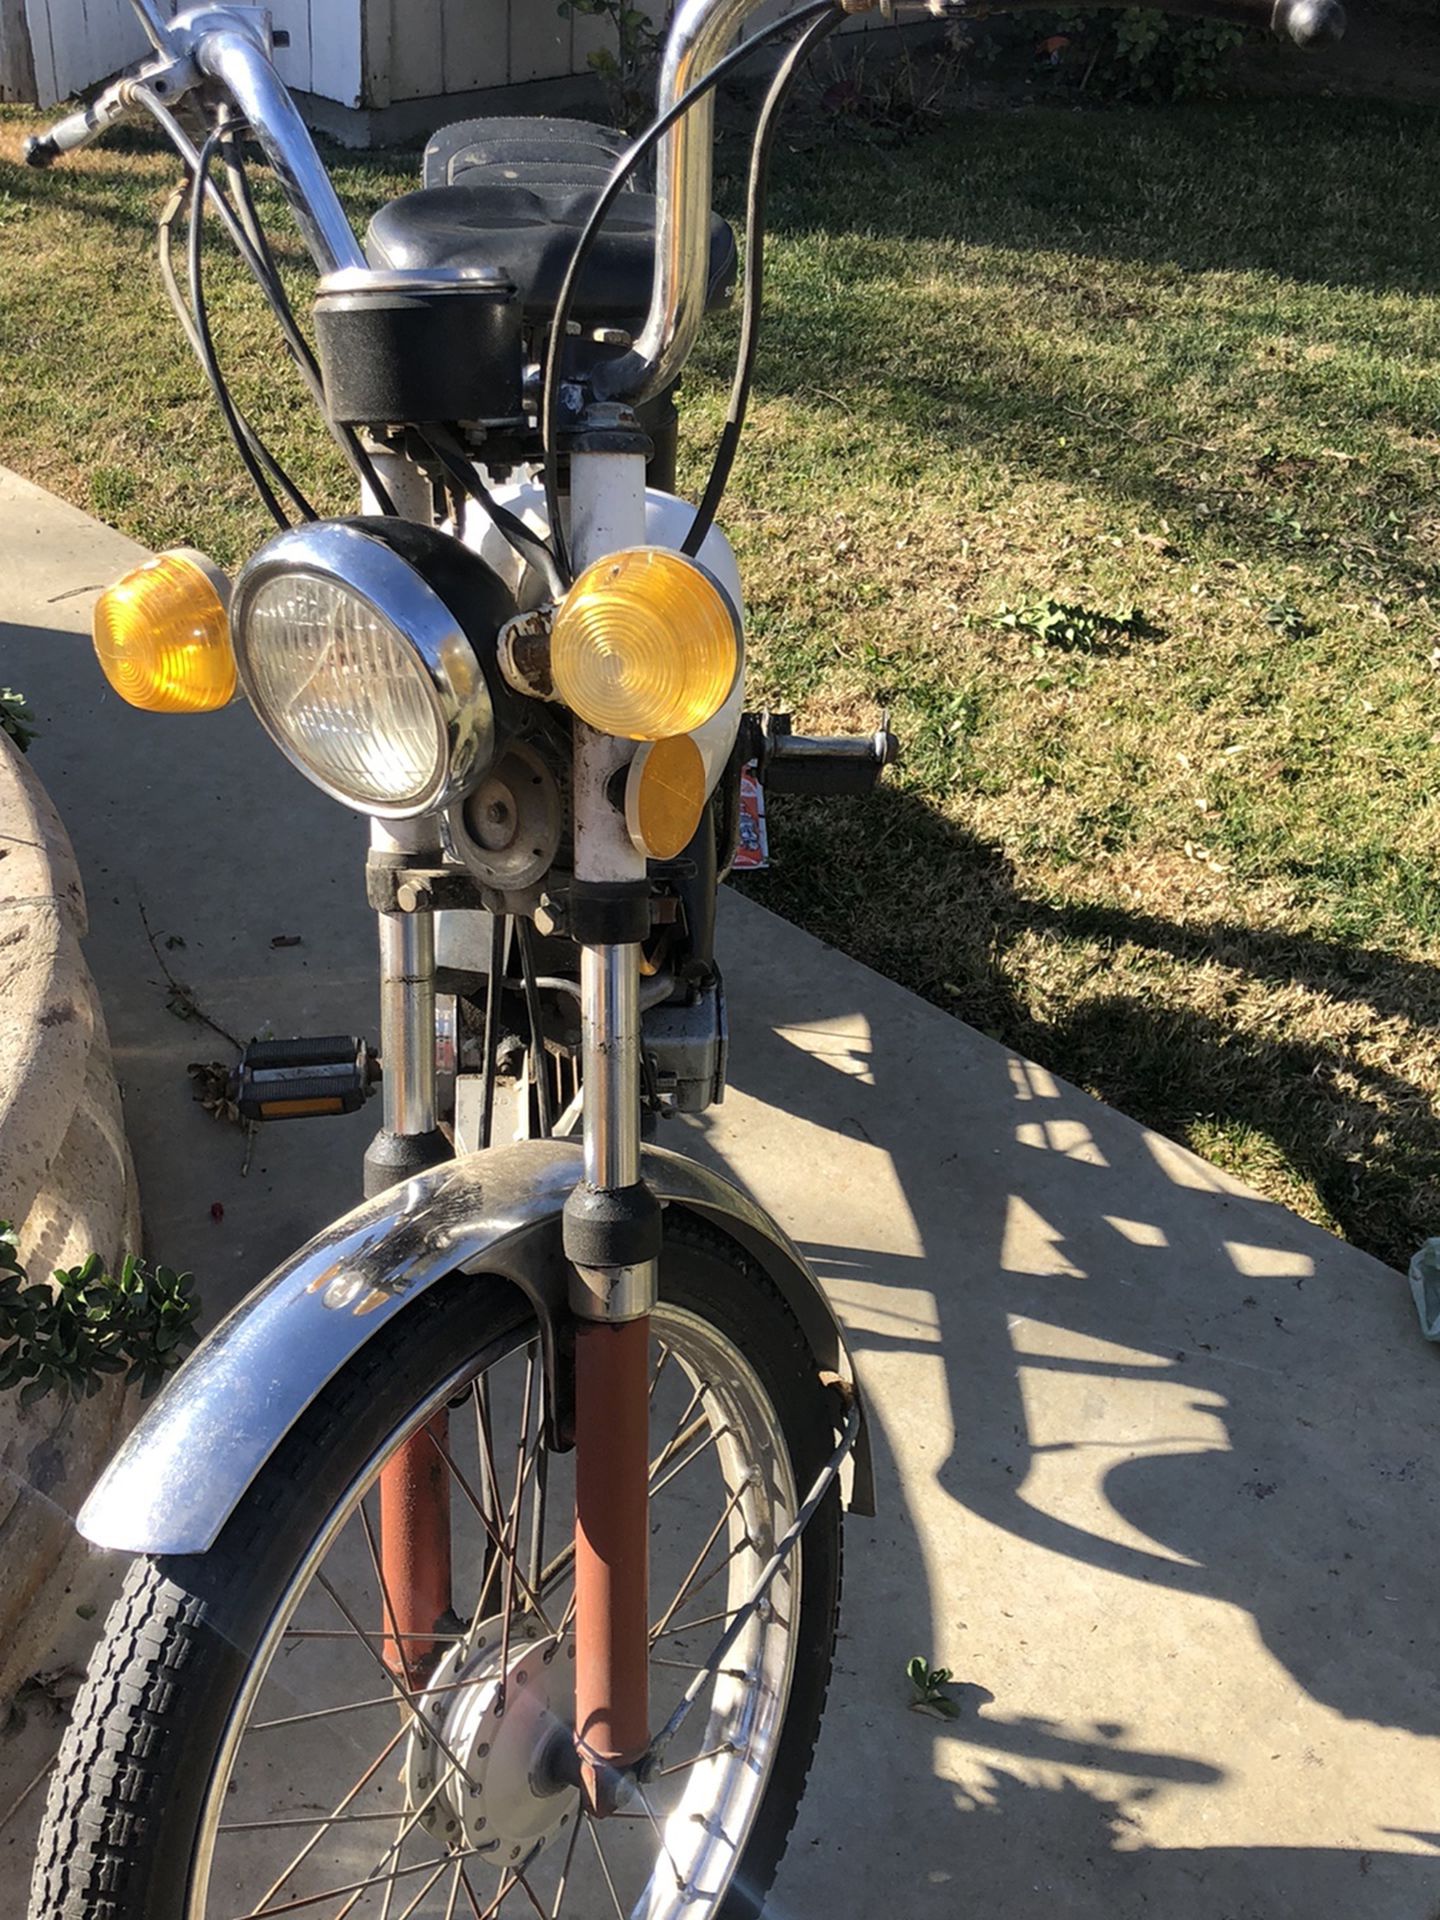 1979 Moped